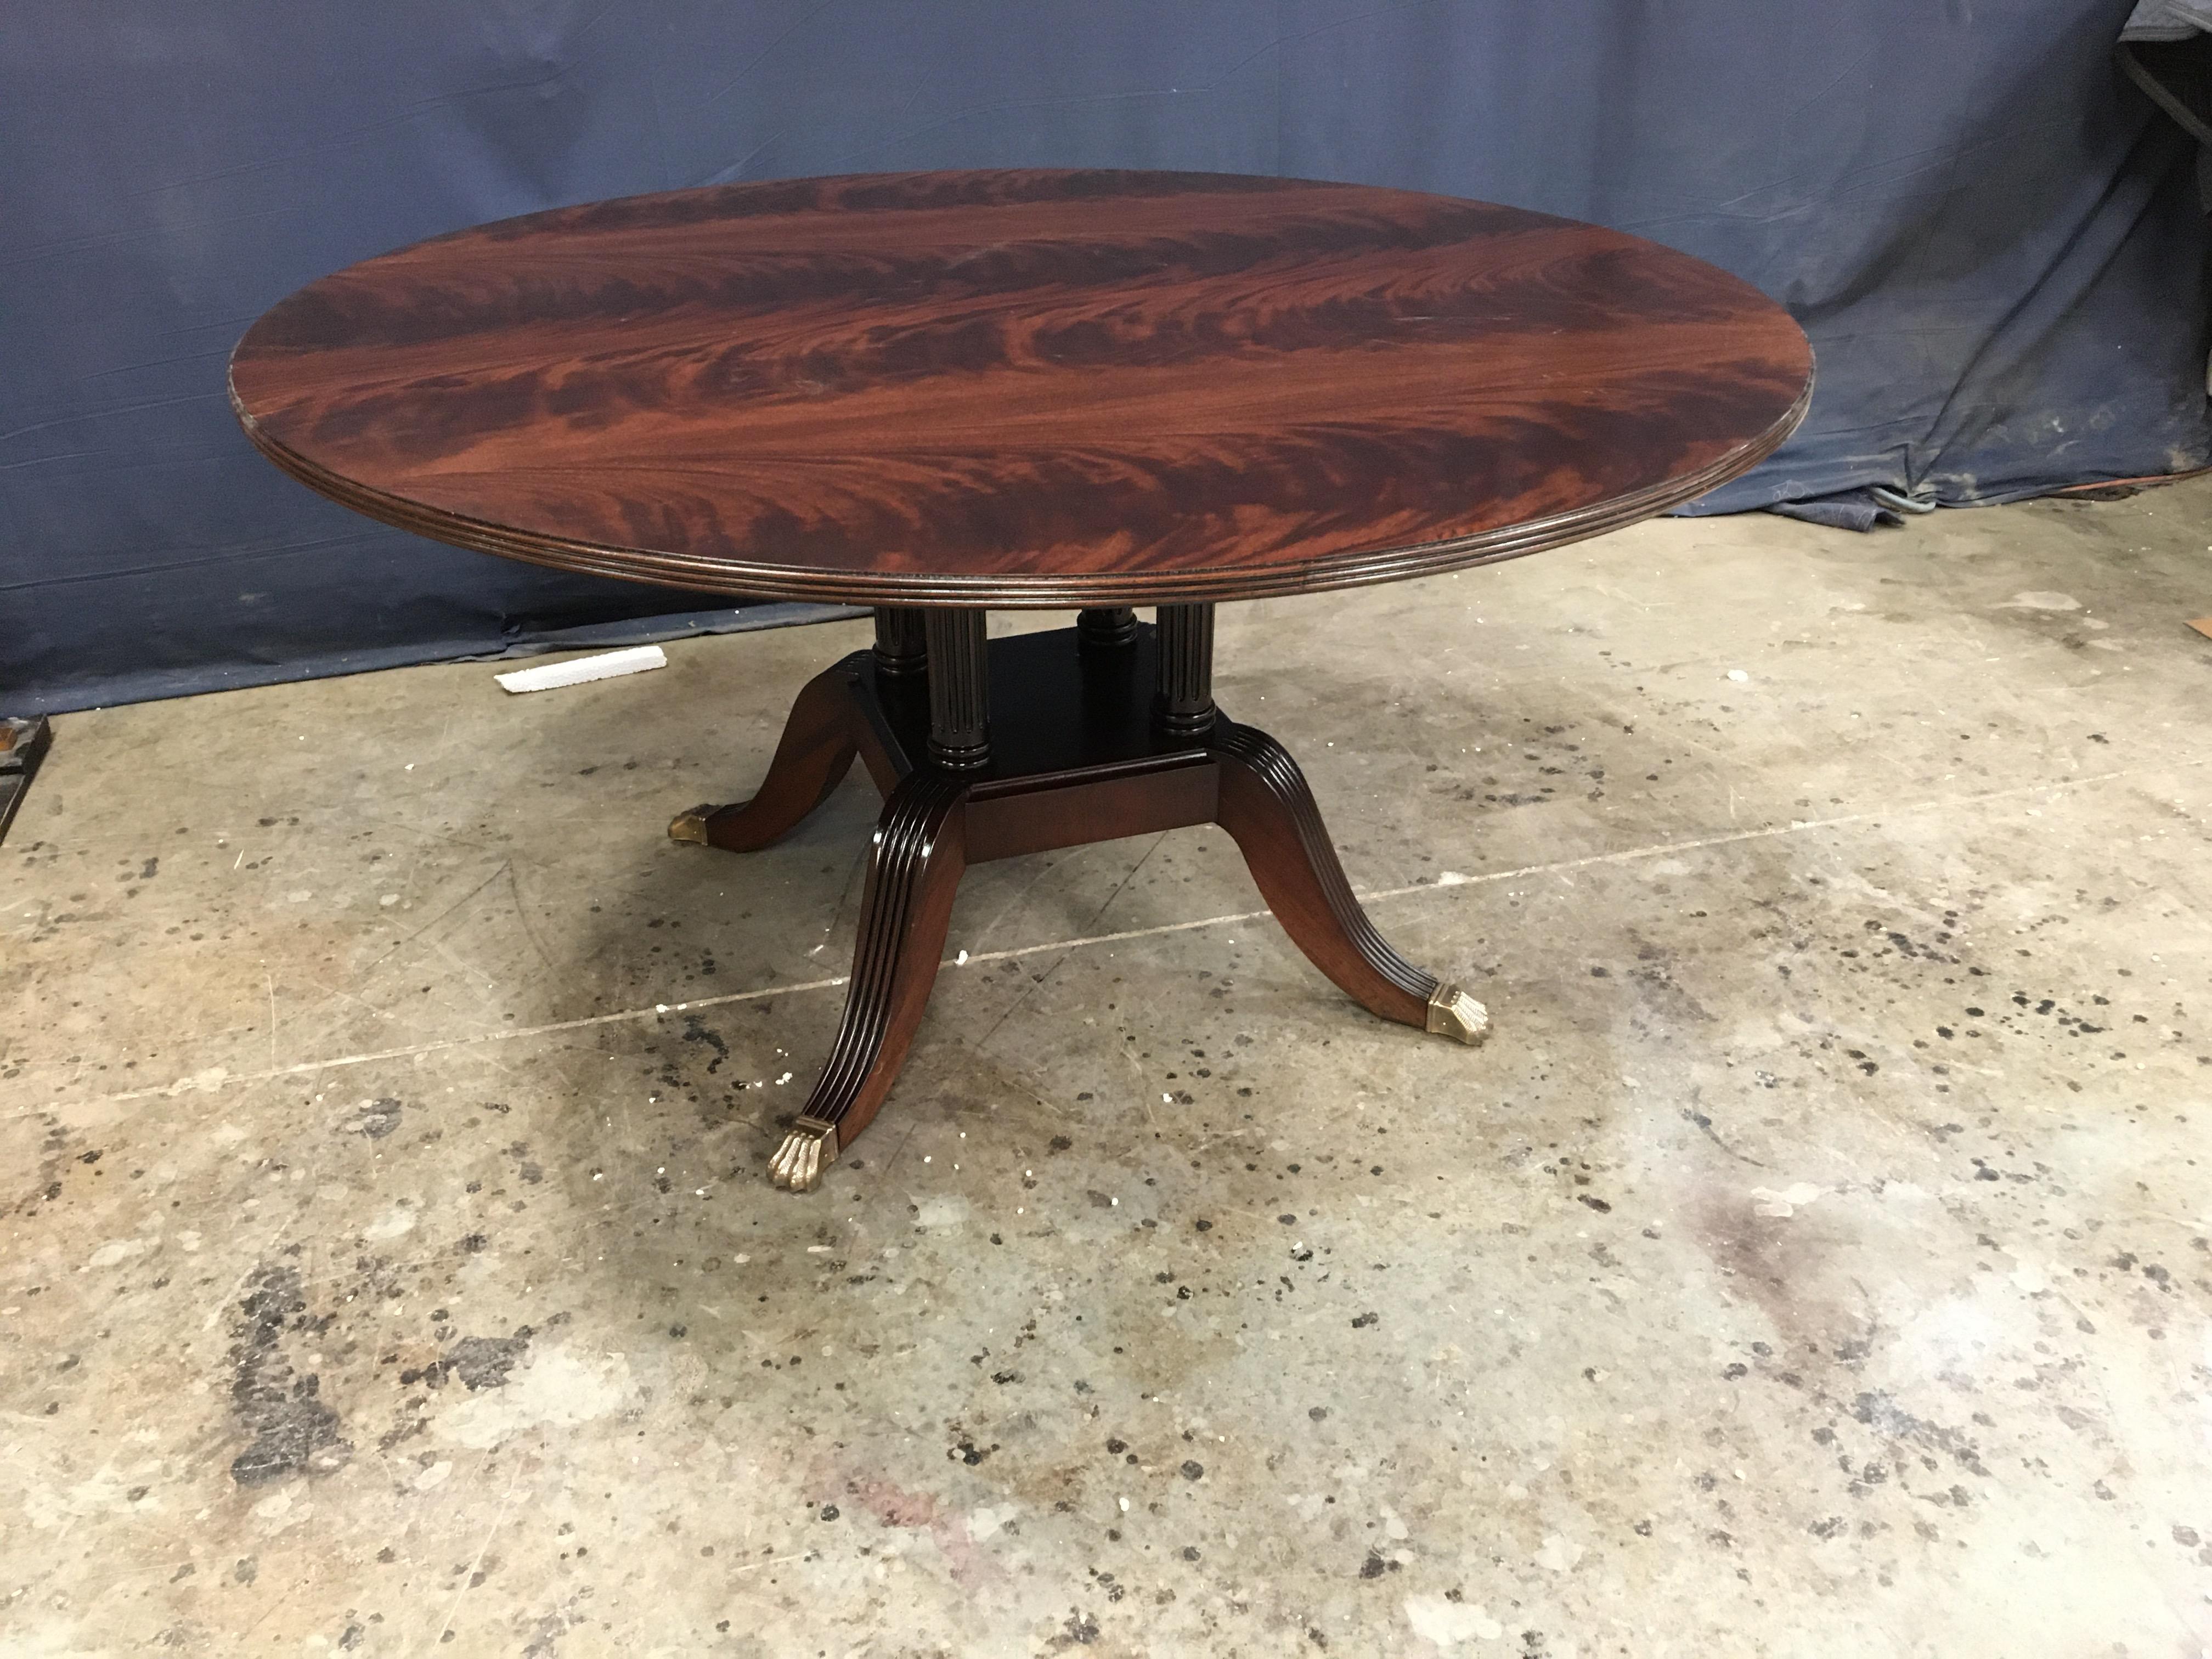 This is made-to-order round traditional mahogany dining table made in the Leighton Hall shop. It features a field of reverse-slip-matched West African swirly crotch mahogany which gives the table top unique character. It has a solid mahogany three